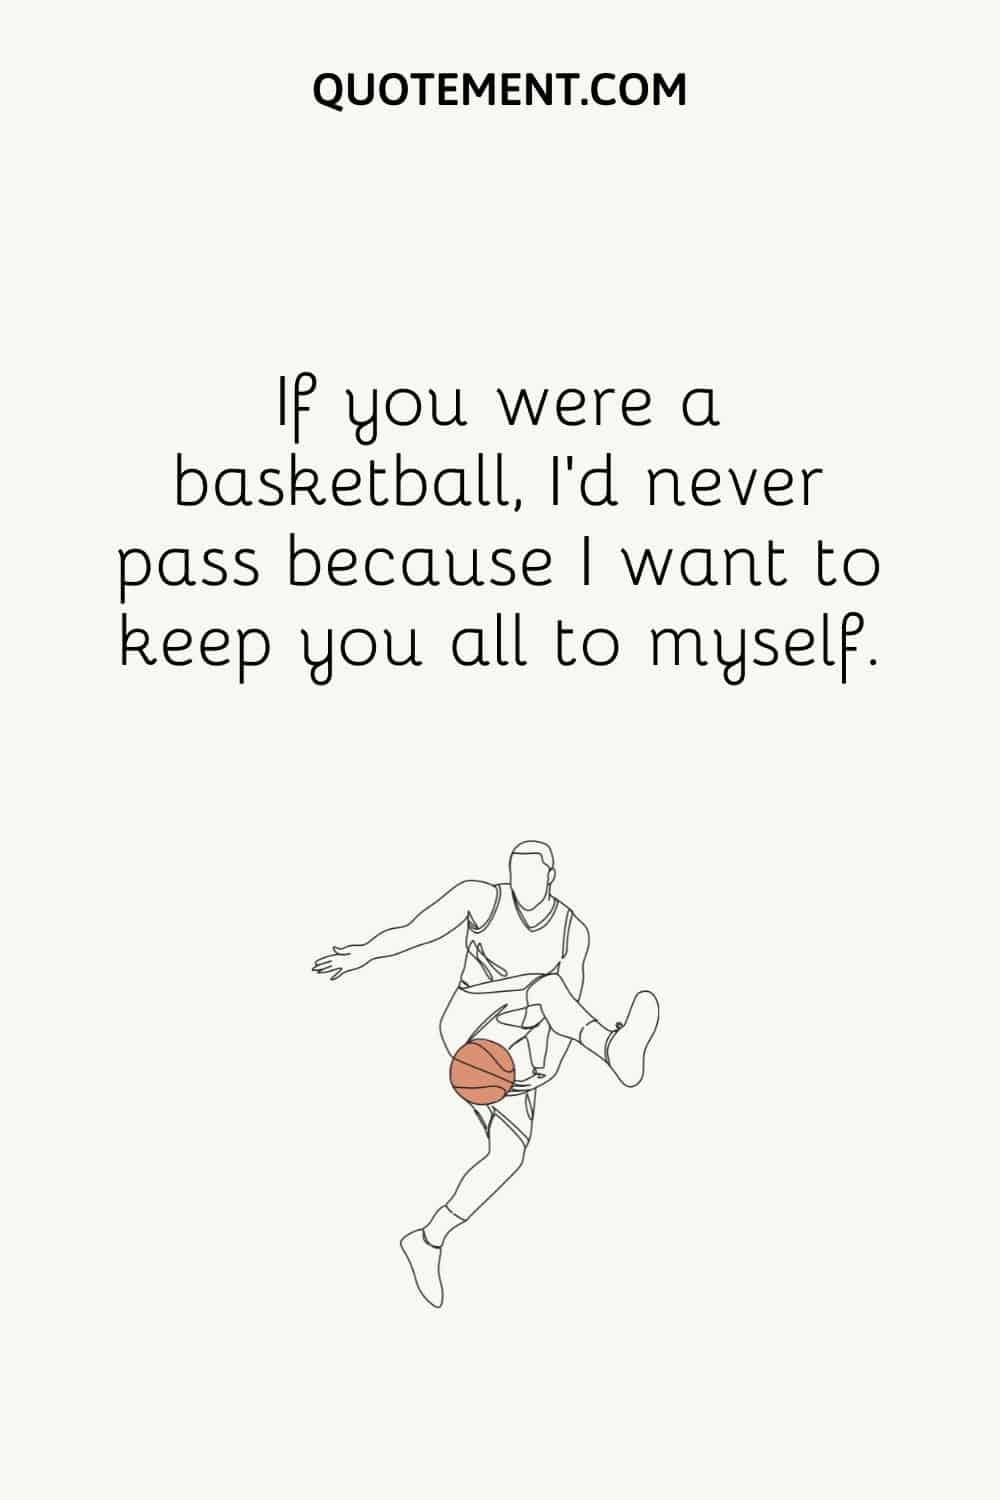 basketball player with a ball illustration representing best basketball pick up line